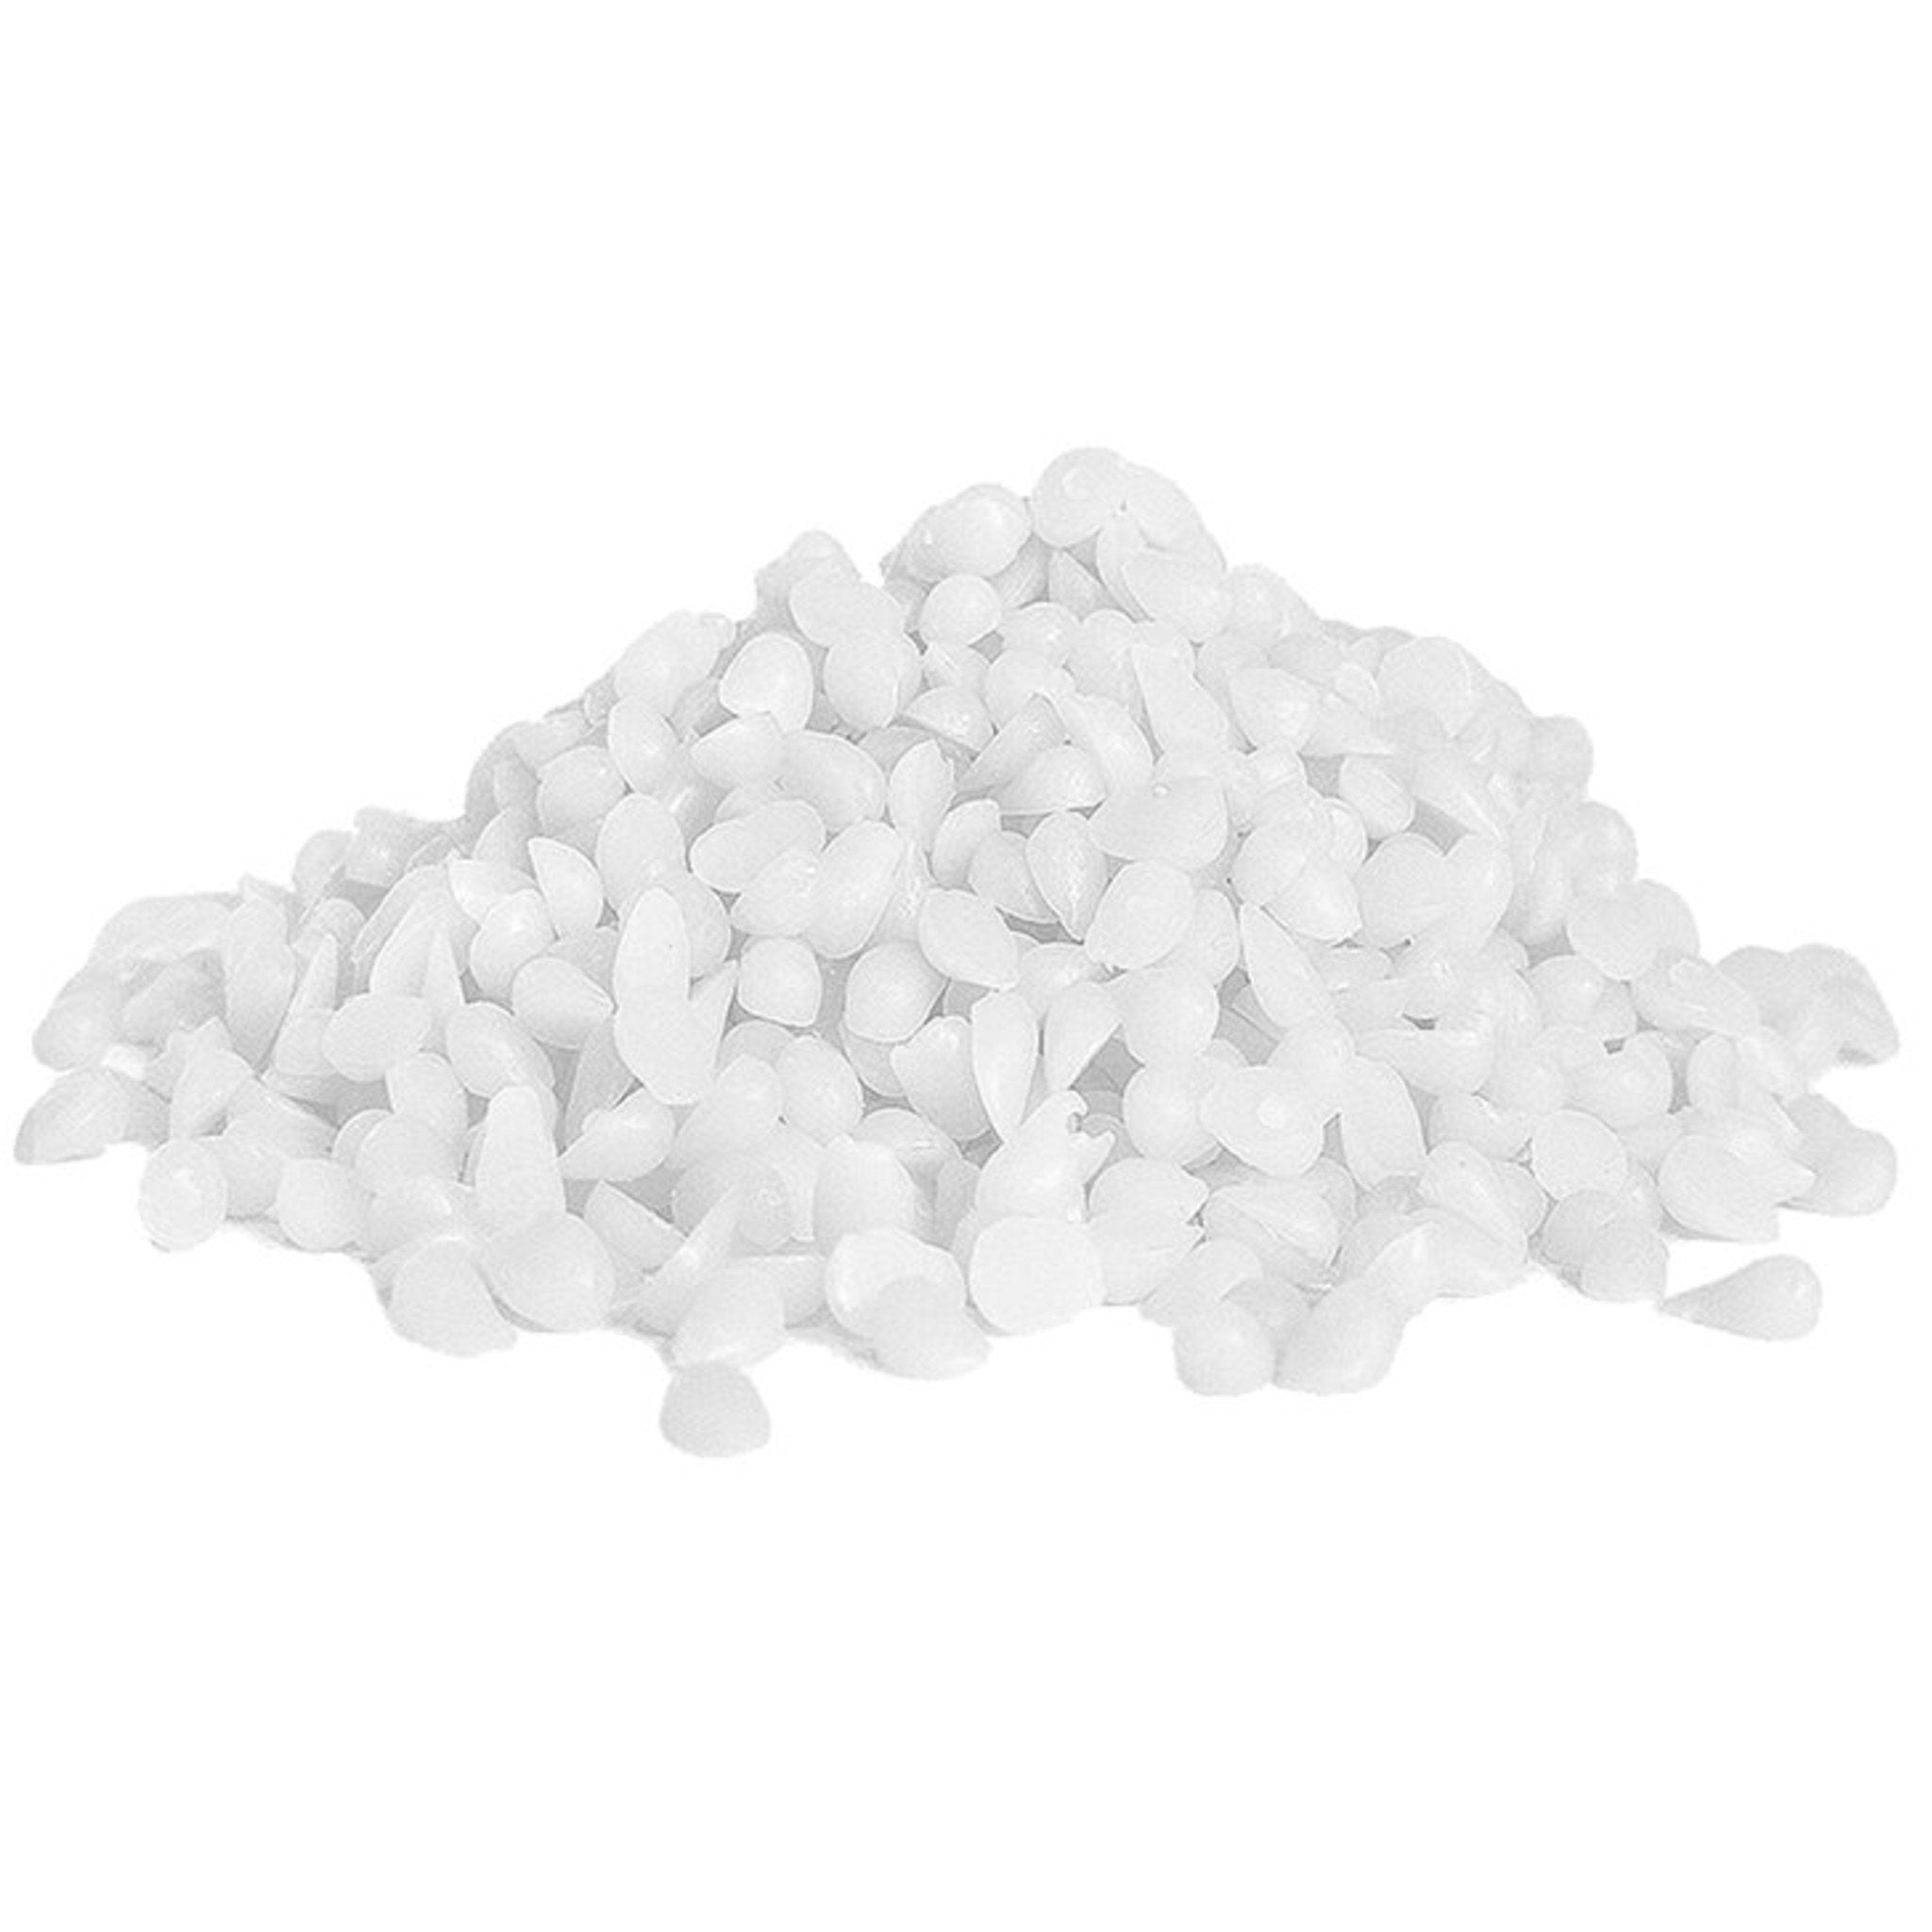 White Beeswax Pellets 2LB 100% Pure and Natural Triple Filtered